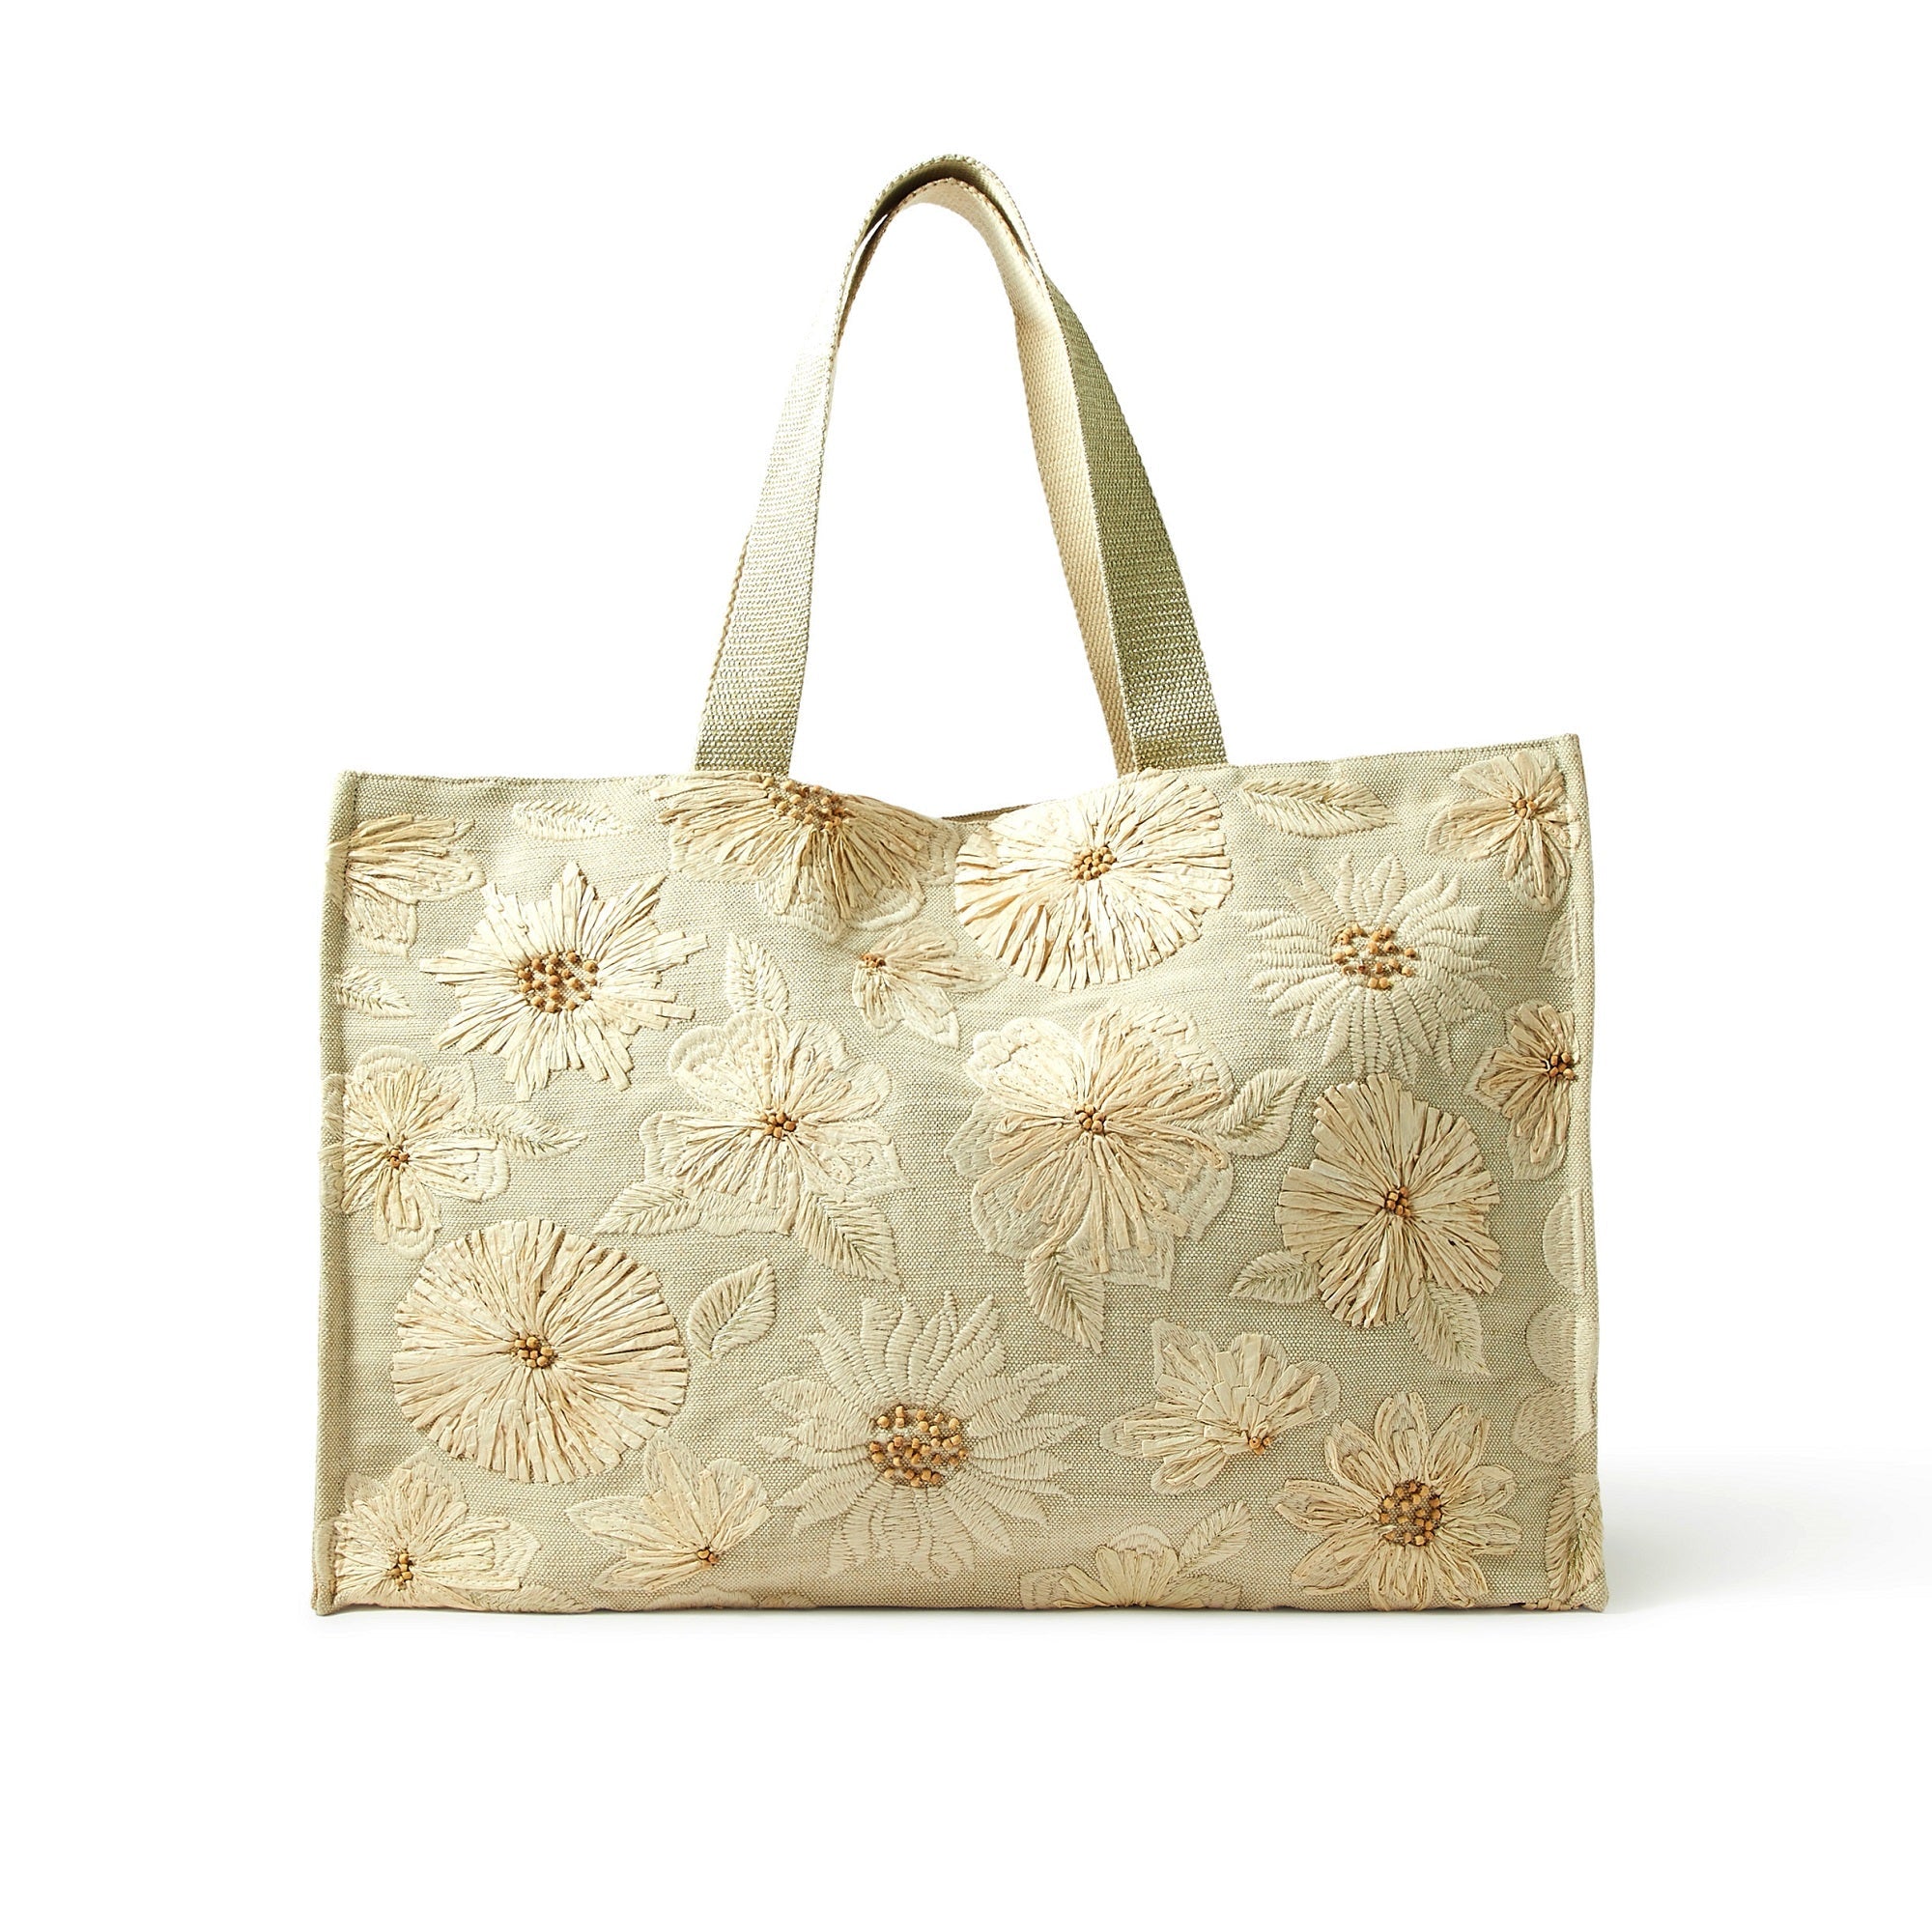 Accessorize London Women's Jute cream Natural embroidered flower tote bag